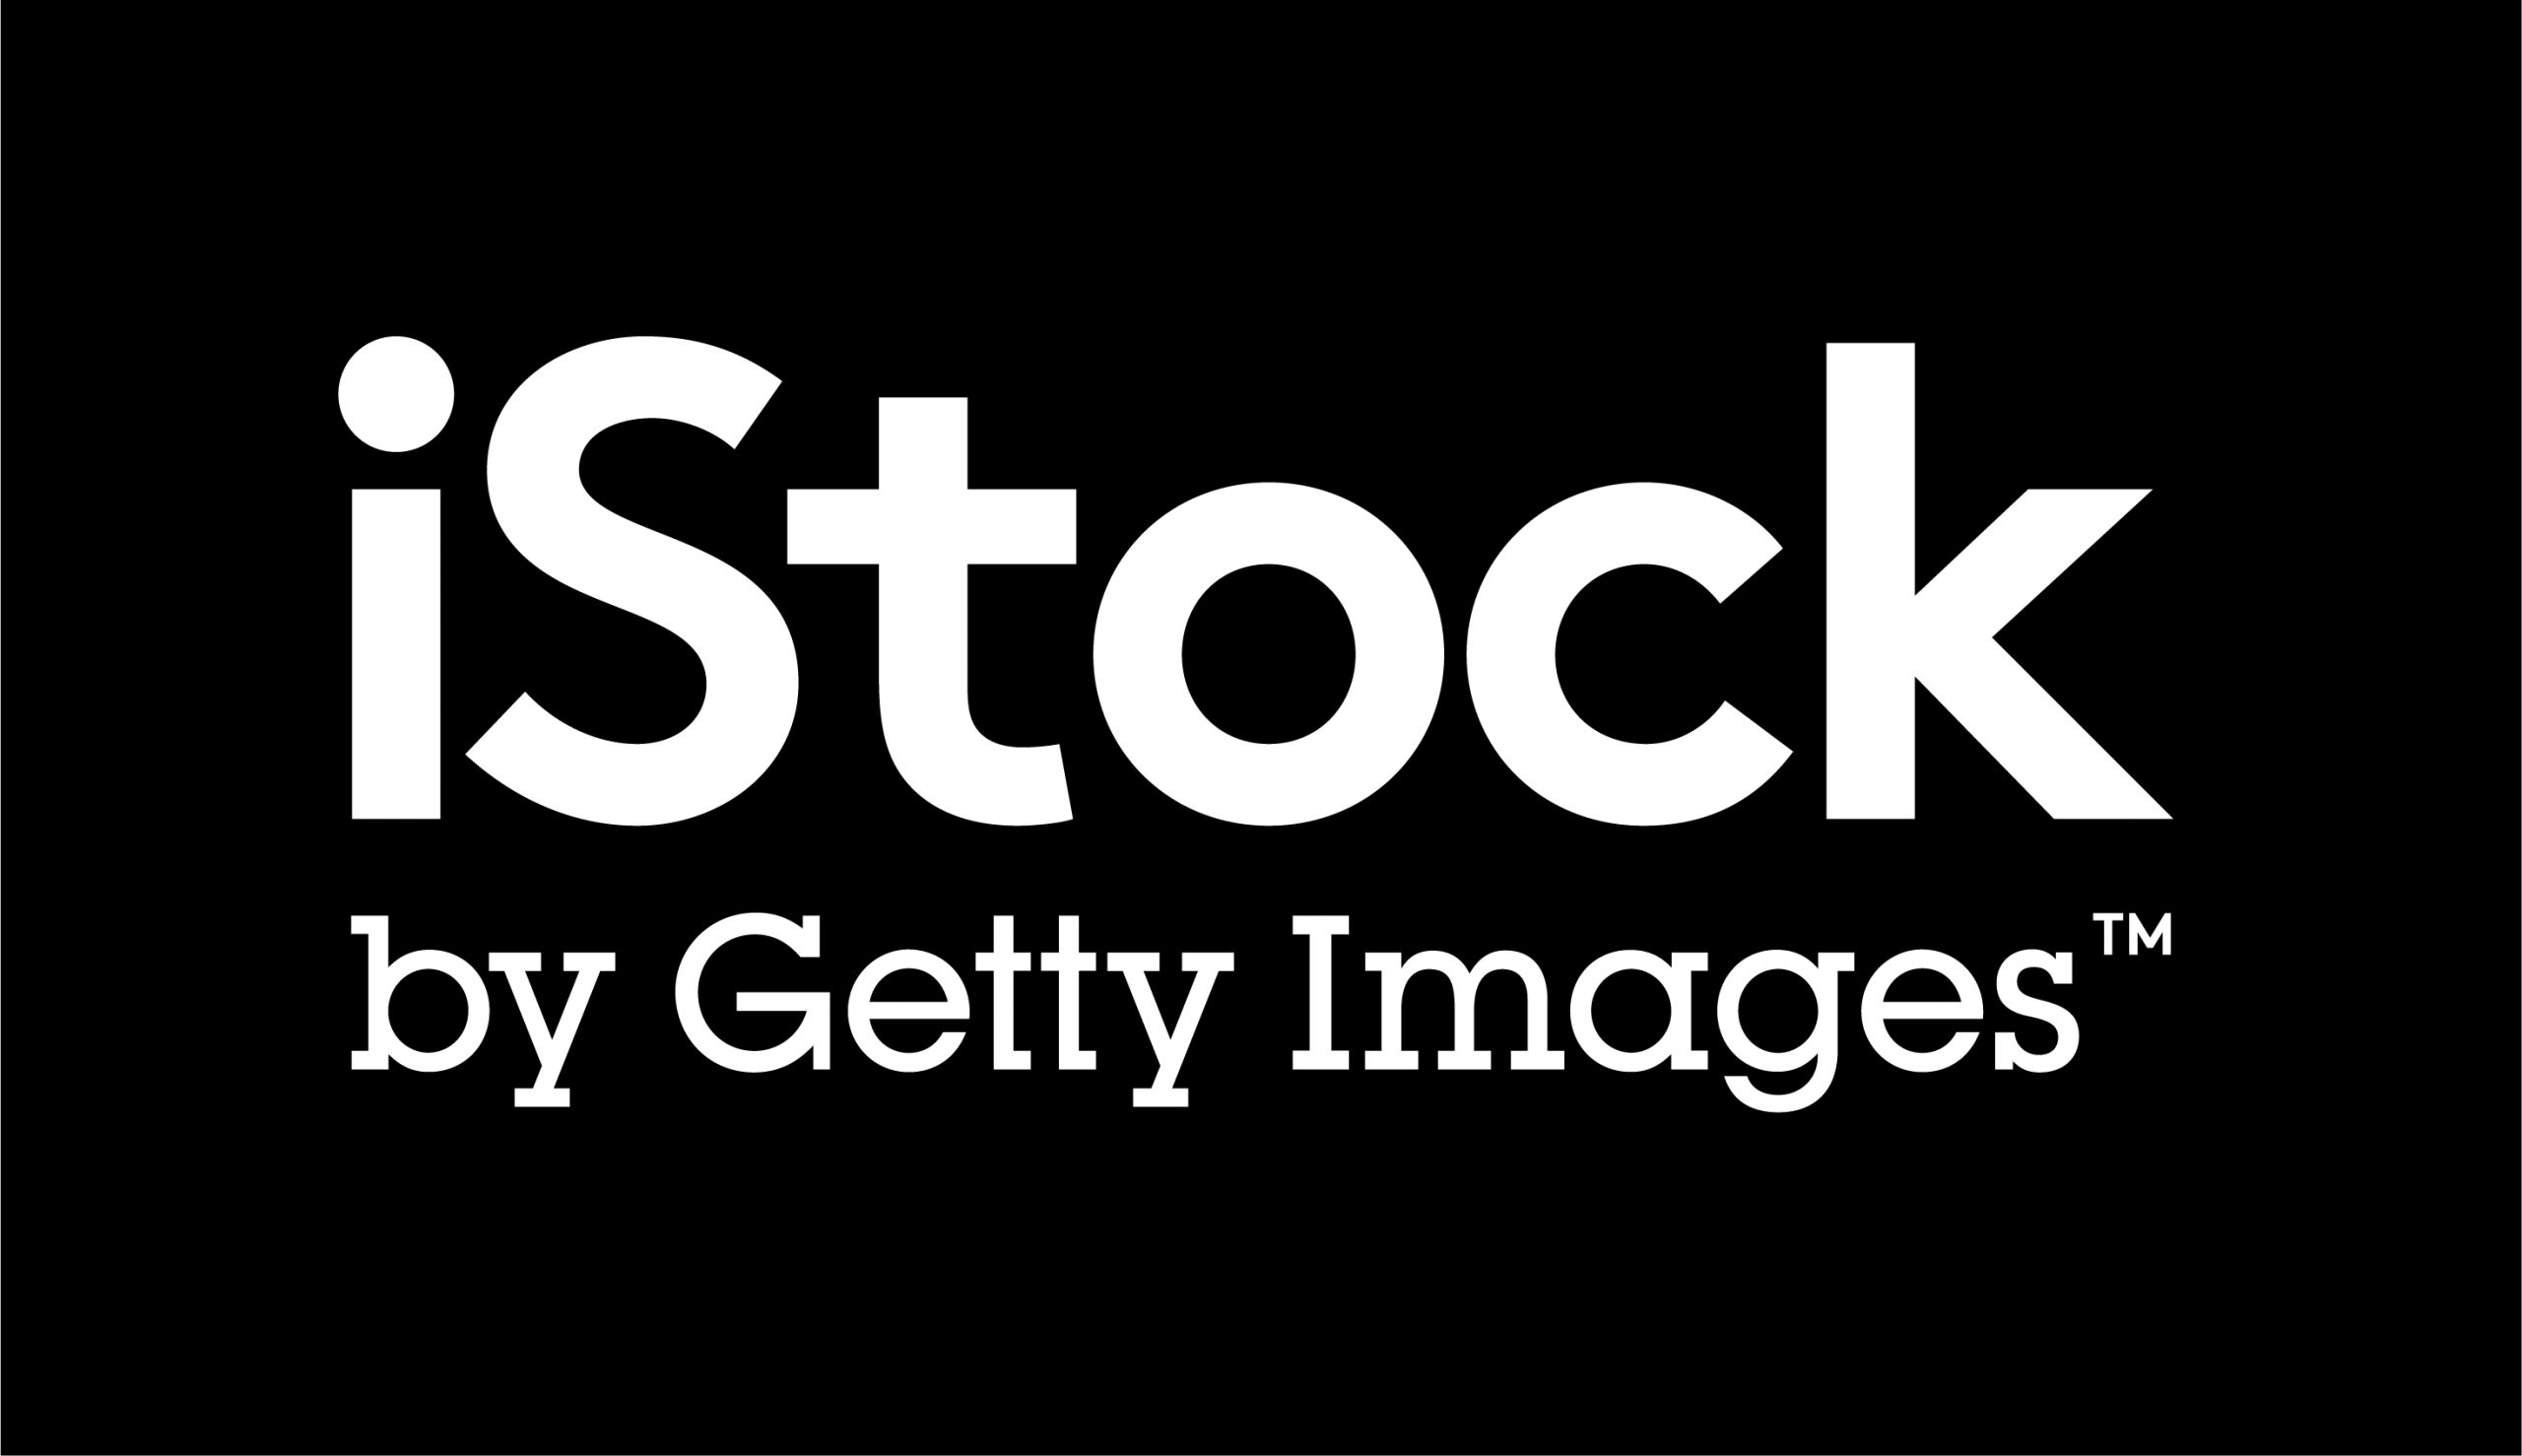 What is iStock Images?